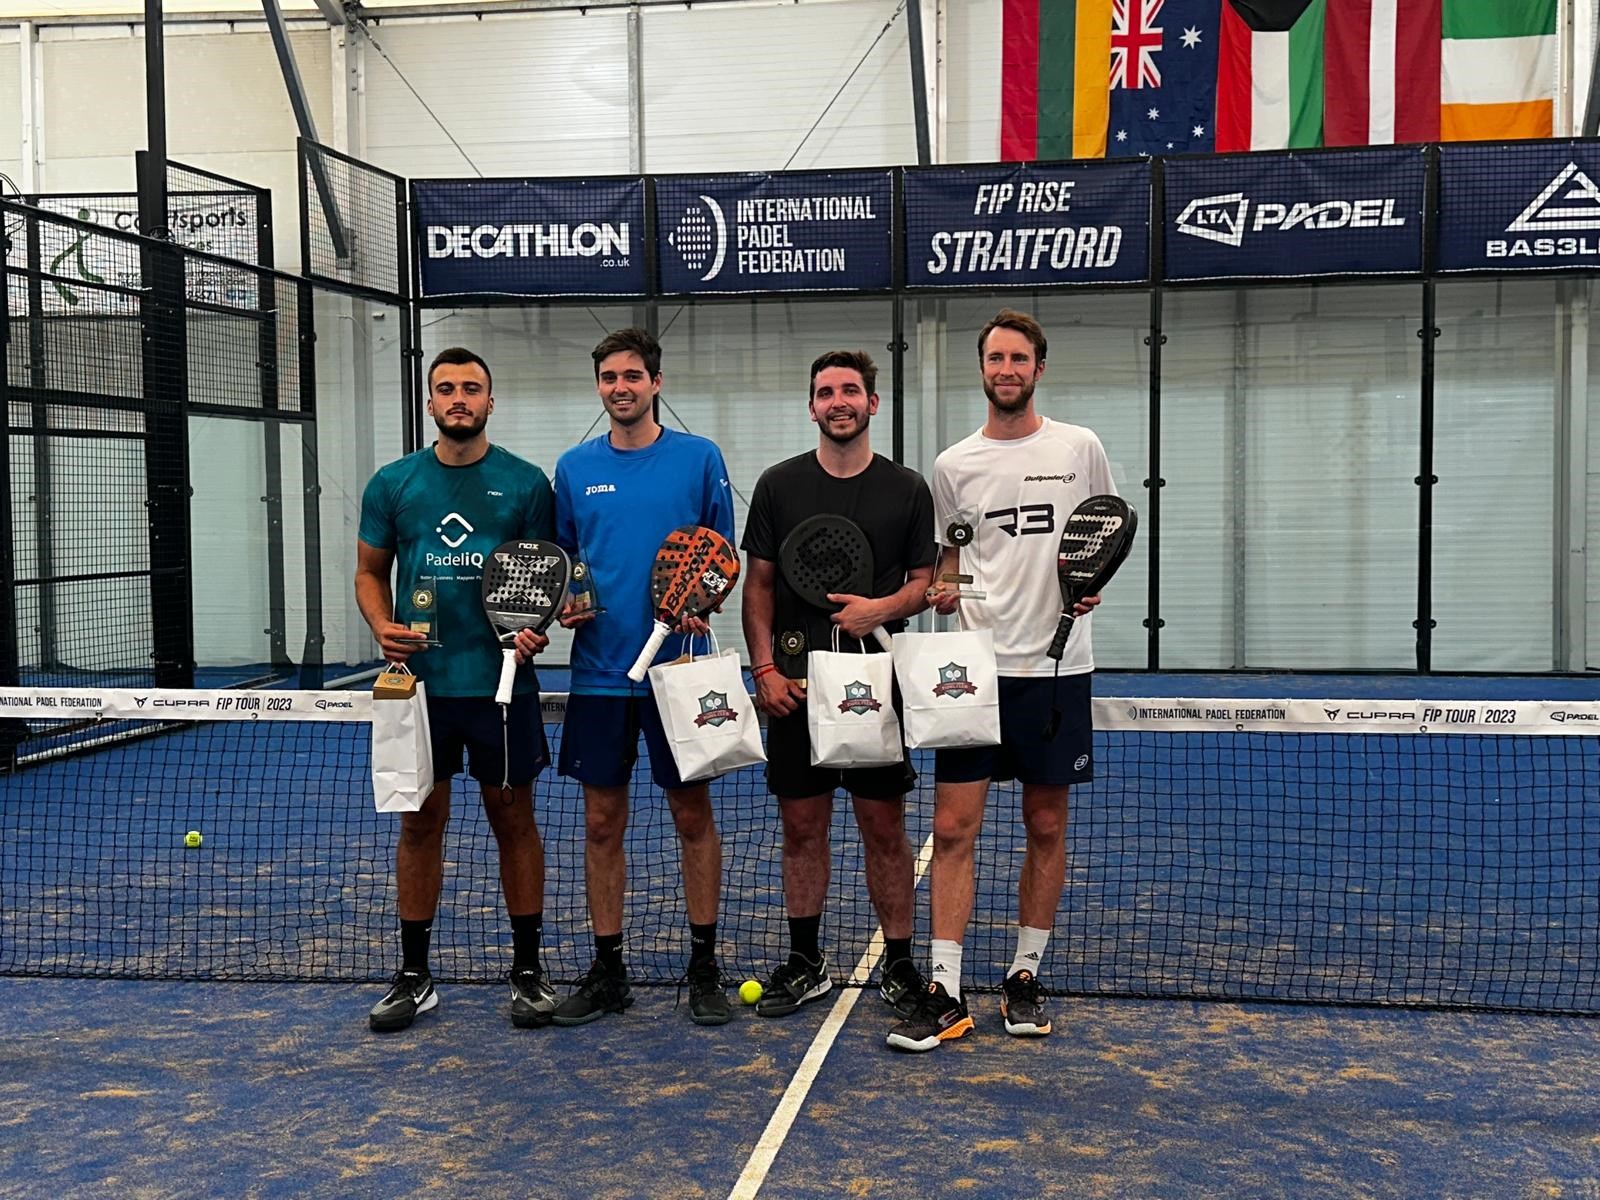 Louie Harris, Rafael Vega Otalaurruchi, Alfonso Patacho and Chris Salisbury on court holding their padel bats and trophies at the FIP Rise Stratford event